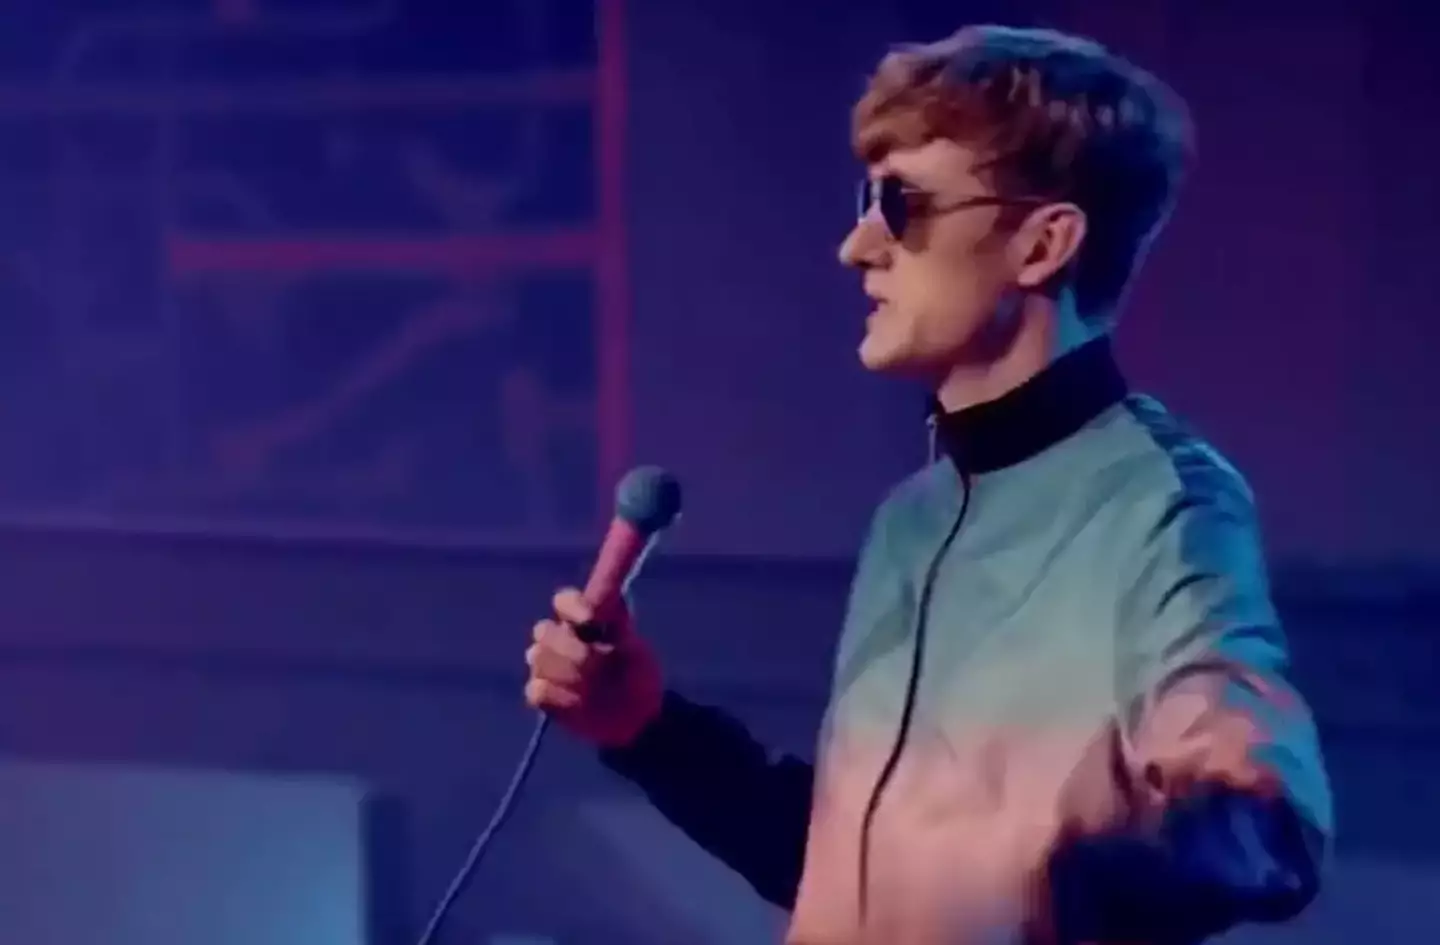 A skit from one of James Acaster's shows is recirculating again due to Ricky Gervais' recent controversy.